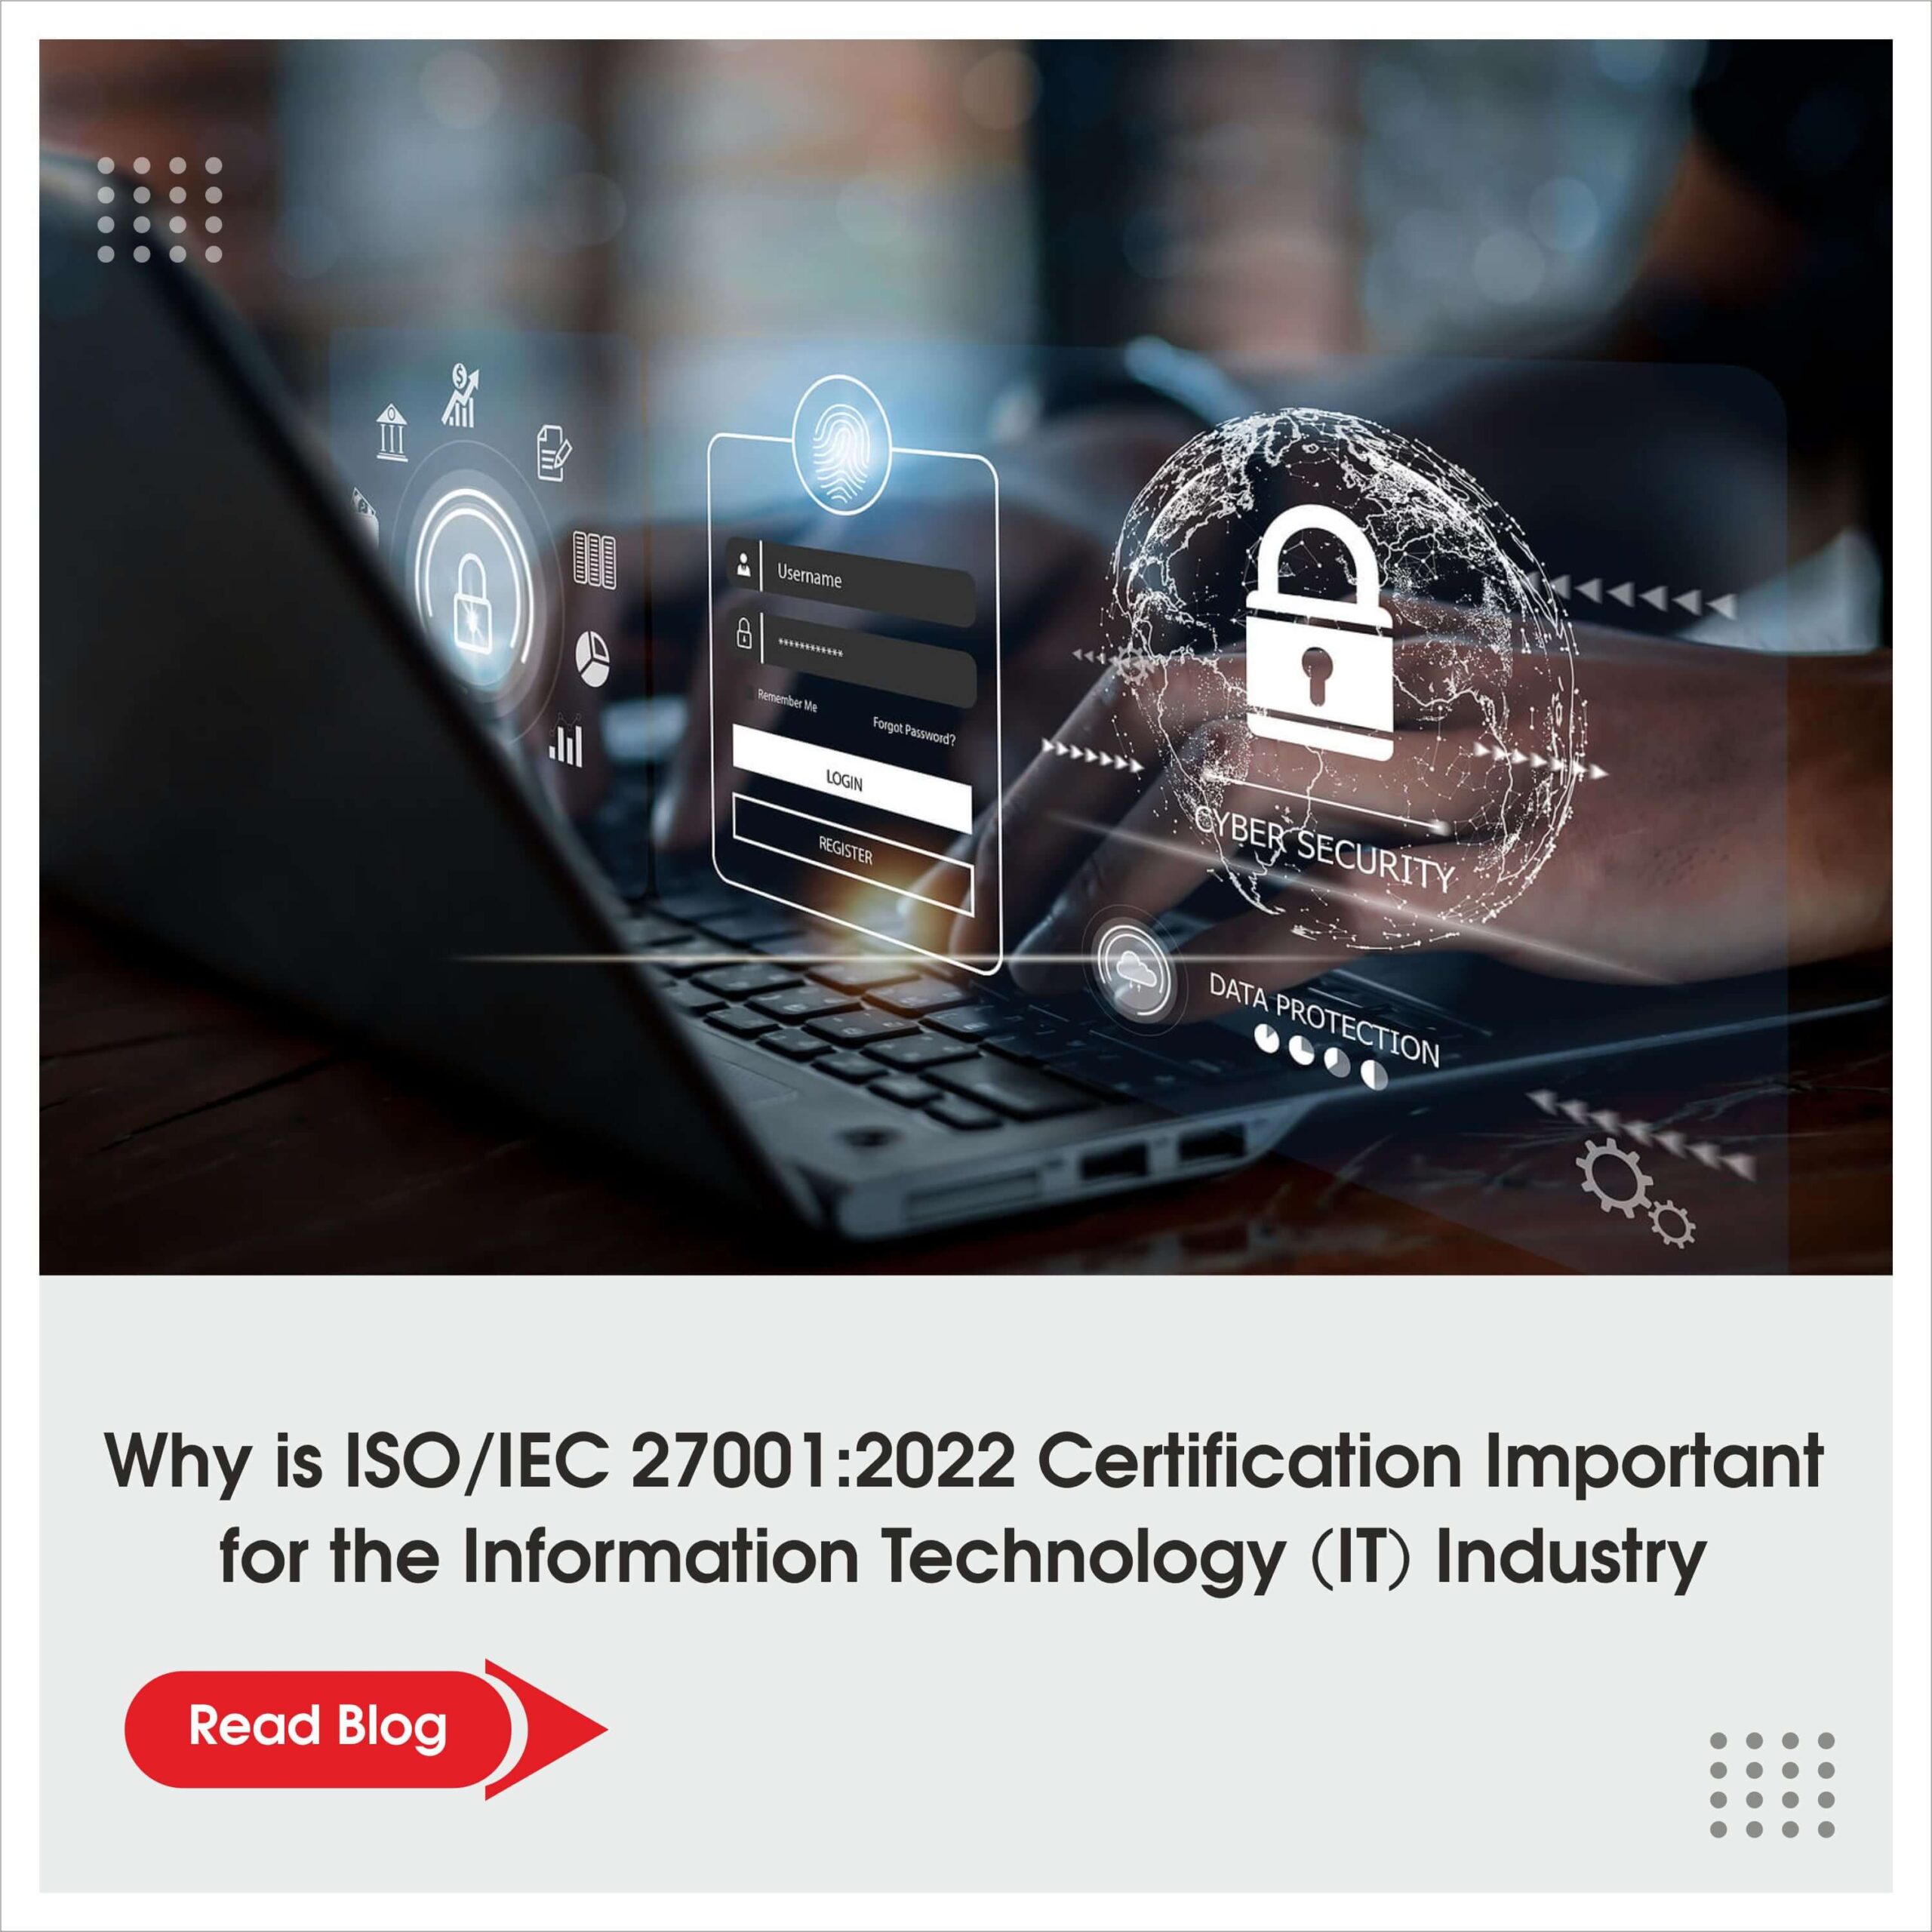 Why is ISO/IEC 27001:2022 Certification Important for the Information Technology (IT) Industry?